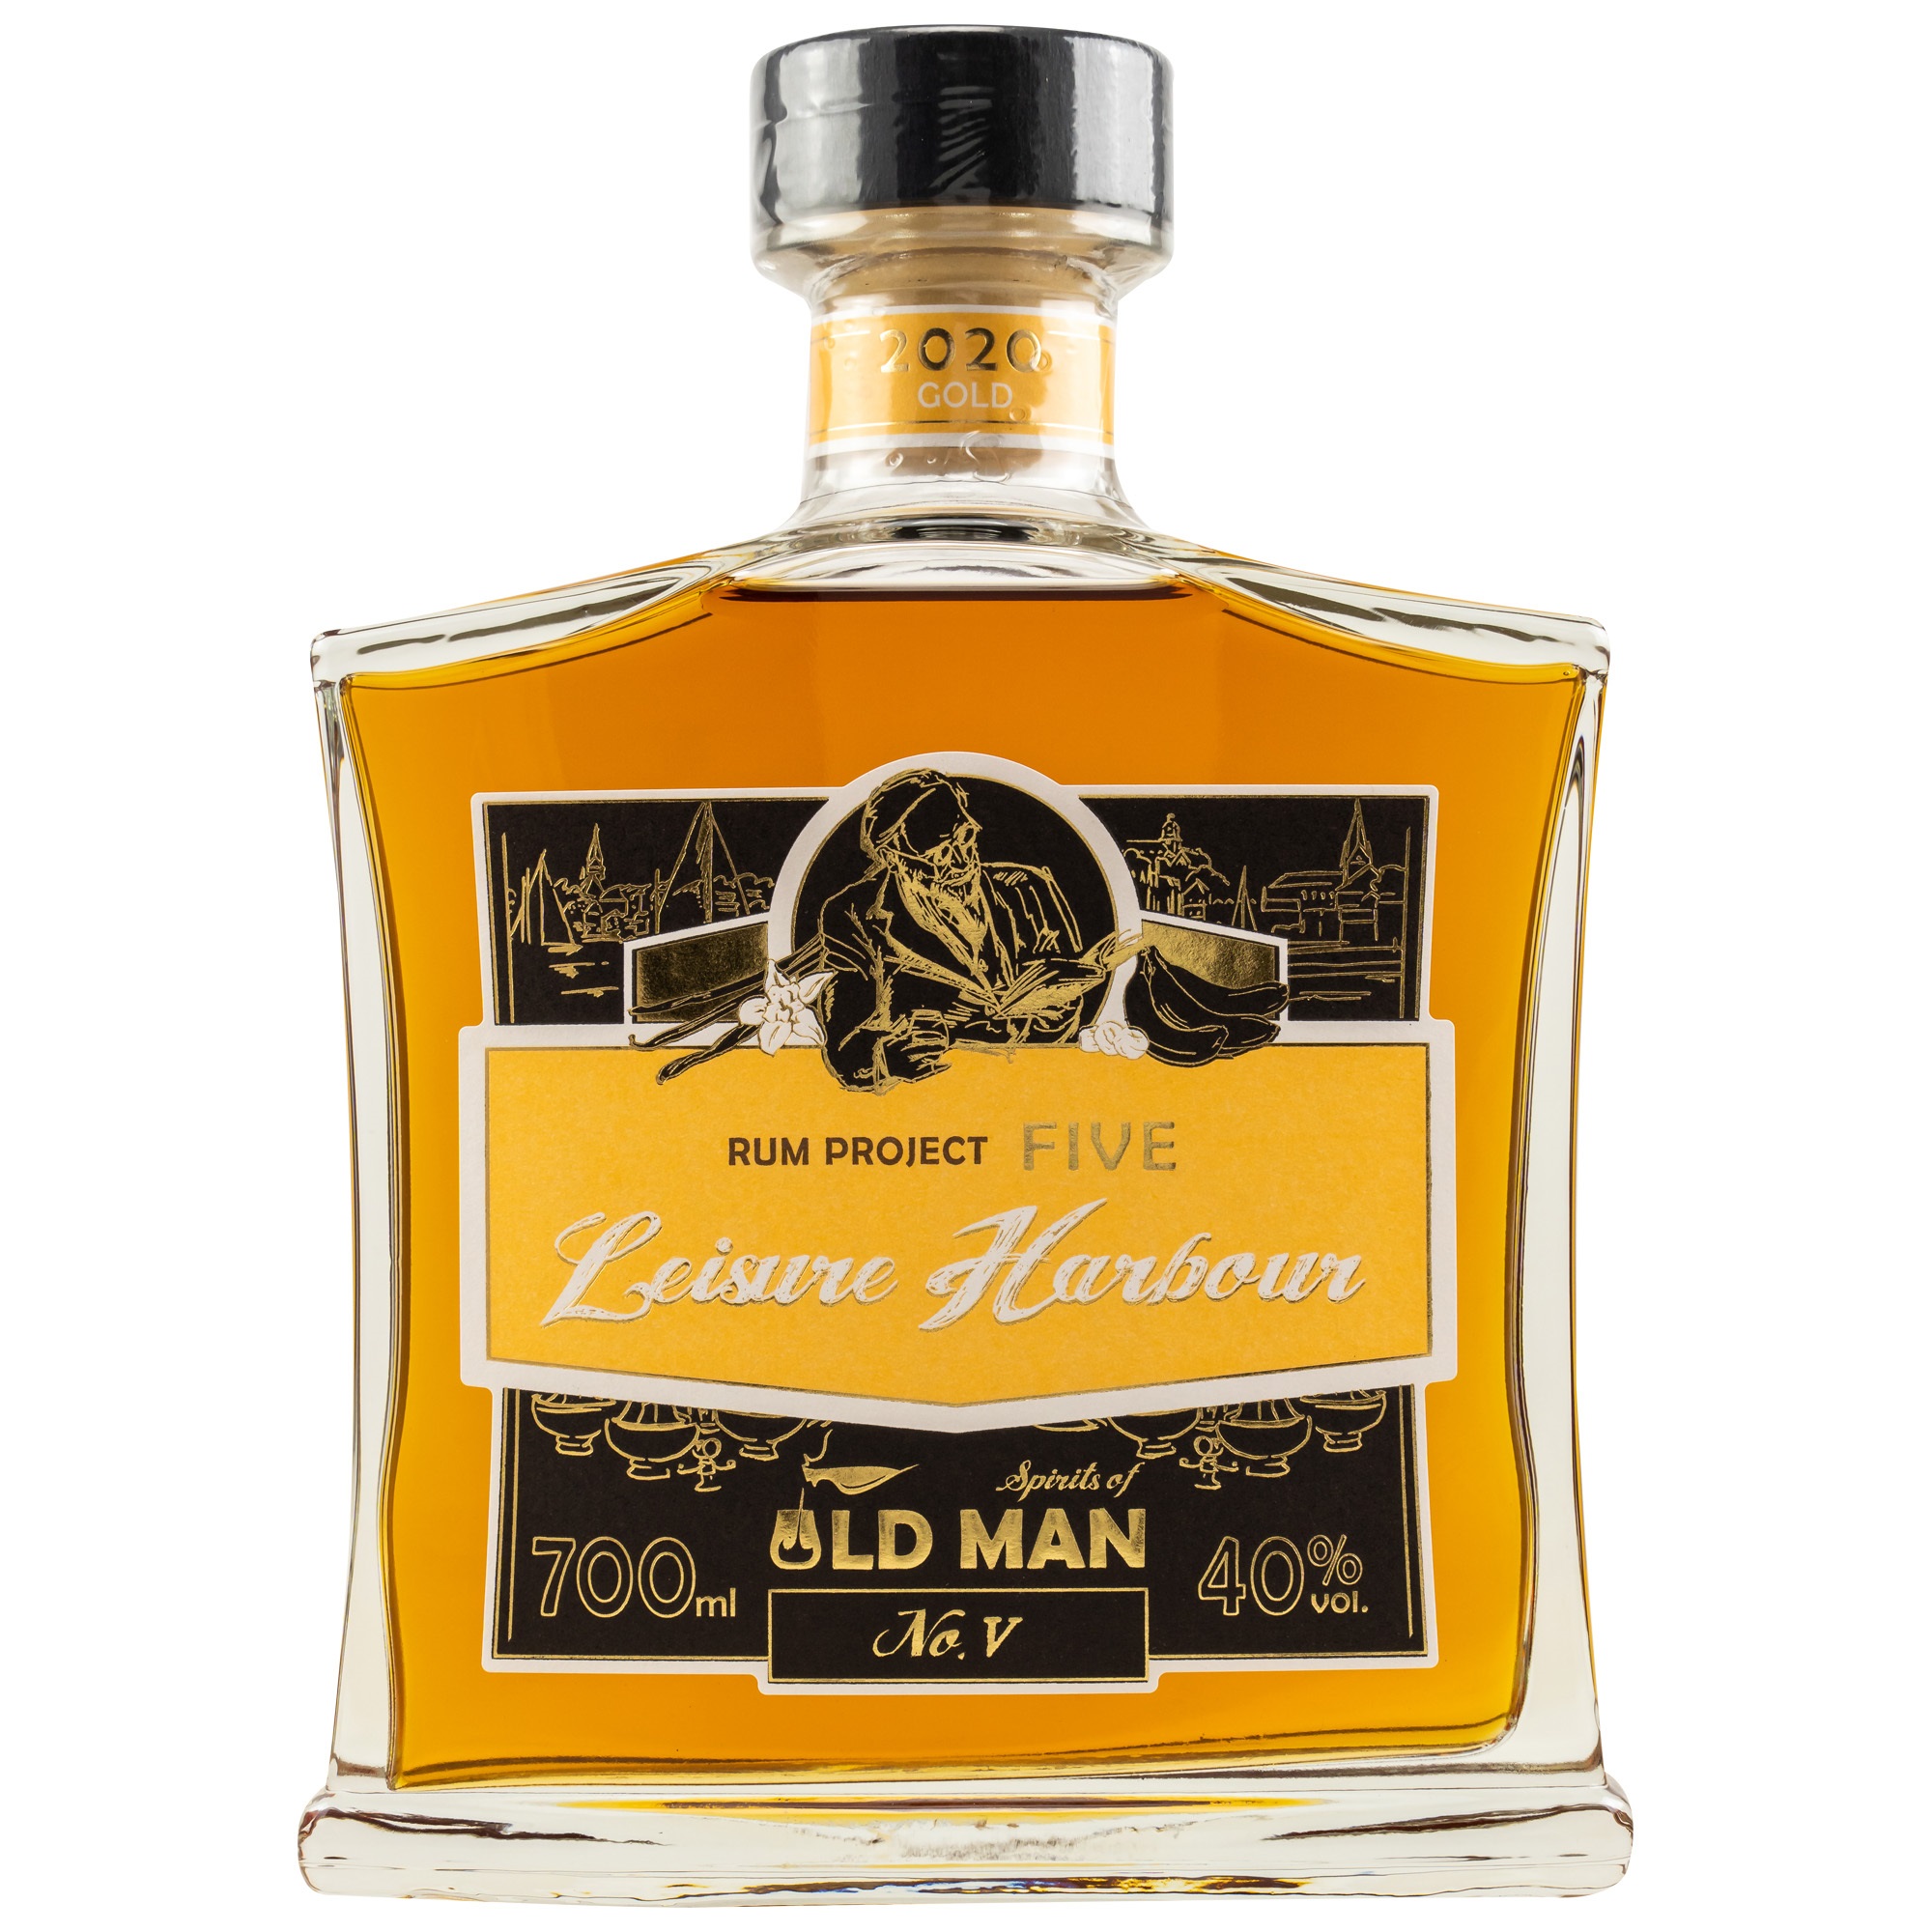 Rum Project Five (Leisure Harbour) - Spirits of Old Man 40.0% 0,7l